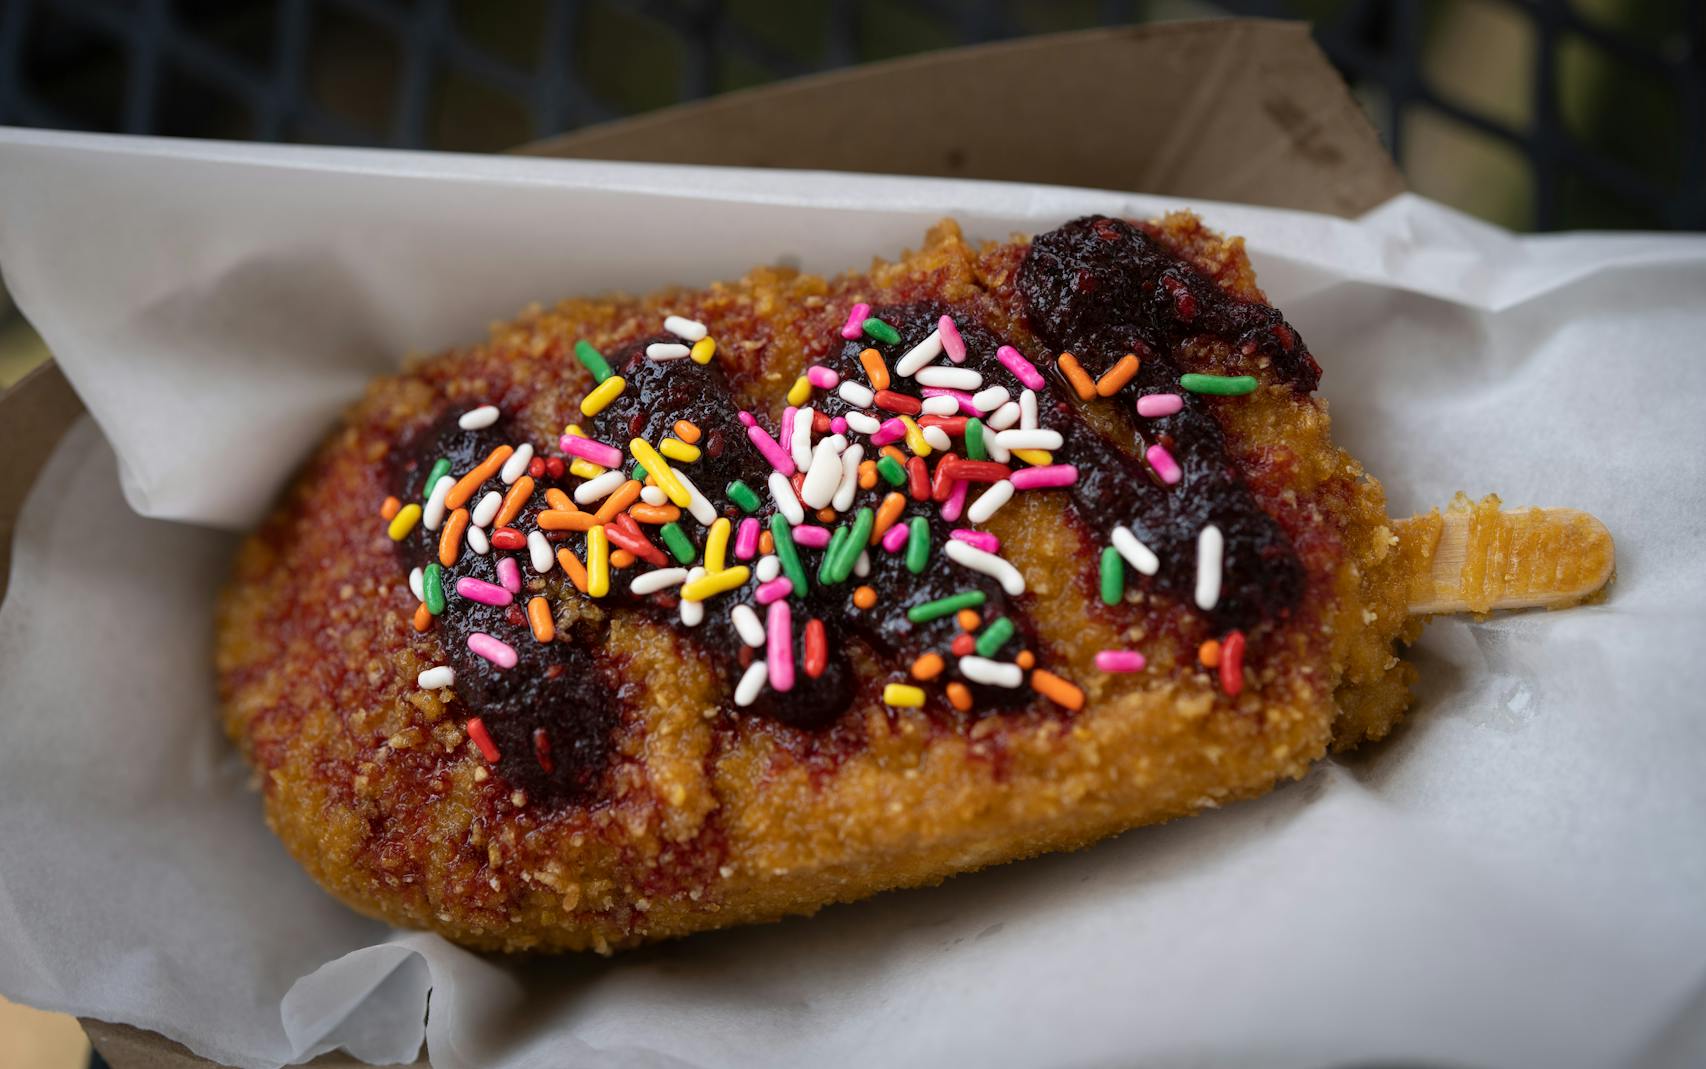 Deep-Fried Ice Cream from Snack House. New foods at the Minnesota State Fair photographed on Thursday, Aug. 25, 2022 in Falcon Heights, Minn. ] RENEE JONES SCHNEIDER • renee.jones@startribune.com